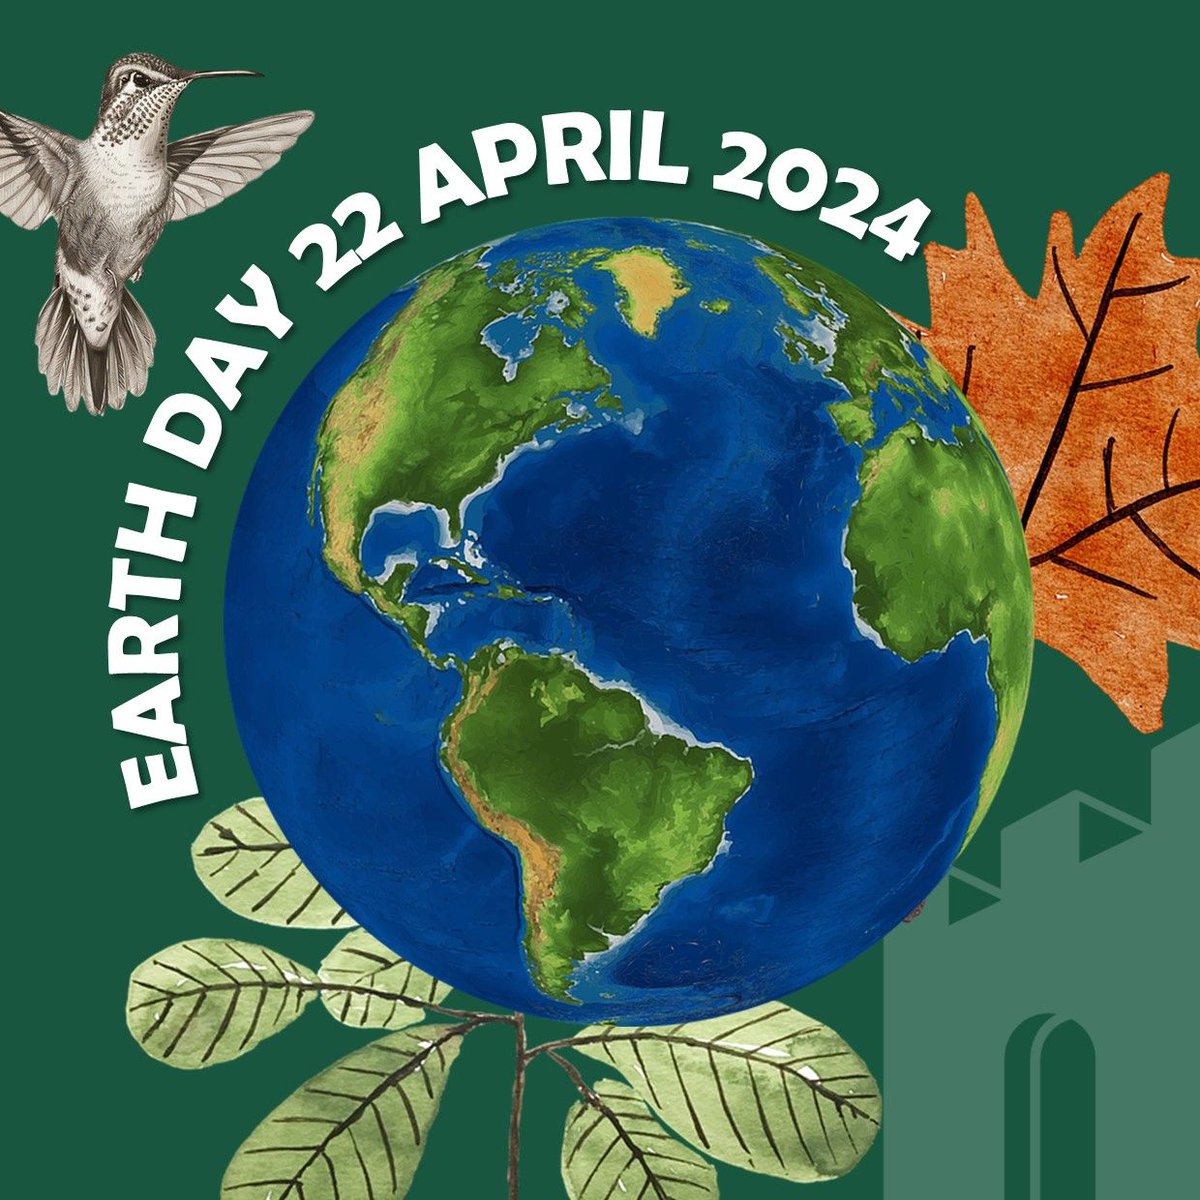 #EarthDay focuses on environmental conservation and sustainability, encouraging us to collectively promote a greener planet and a more promising future. To spread awareness, students have devised a quiz and engaged in activities during form time today.